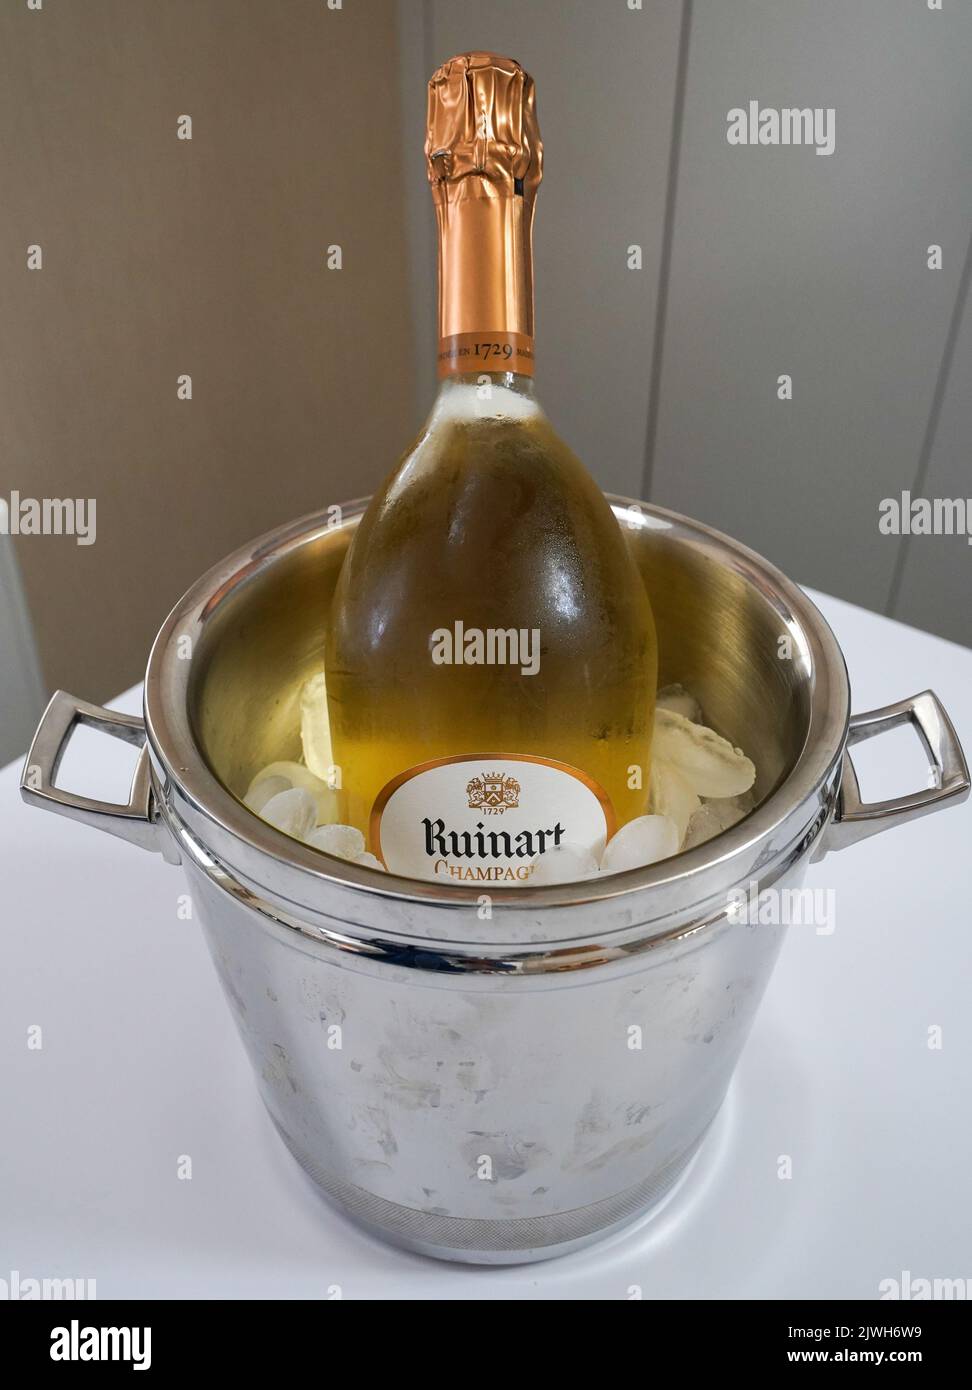 Ay - stock Alamy and - 2 hi-res images photography Page champagne